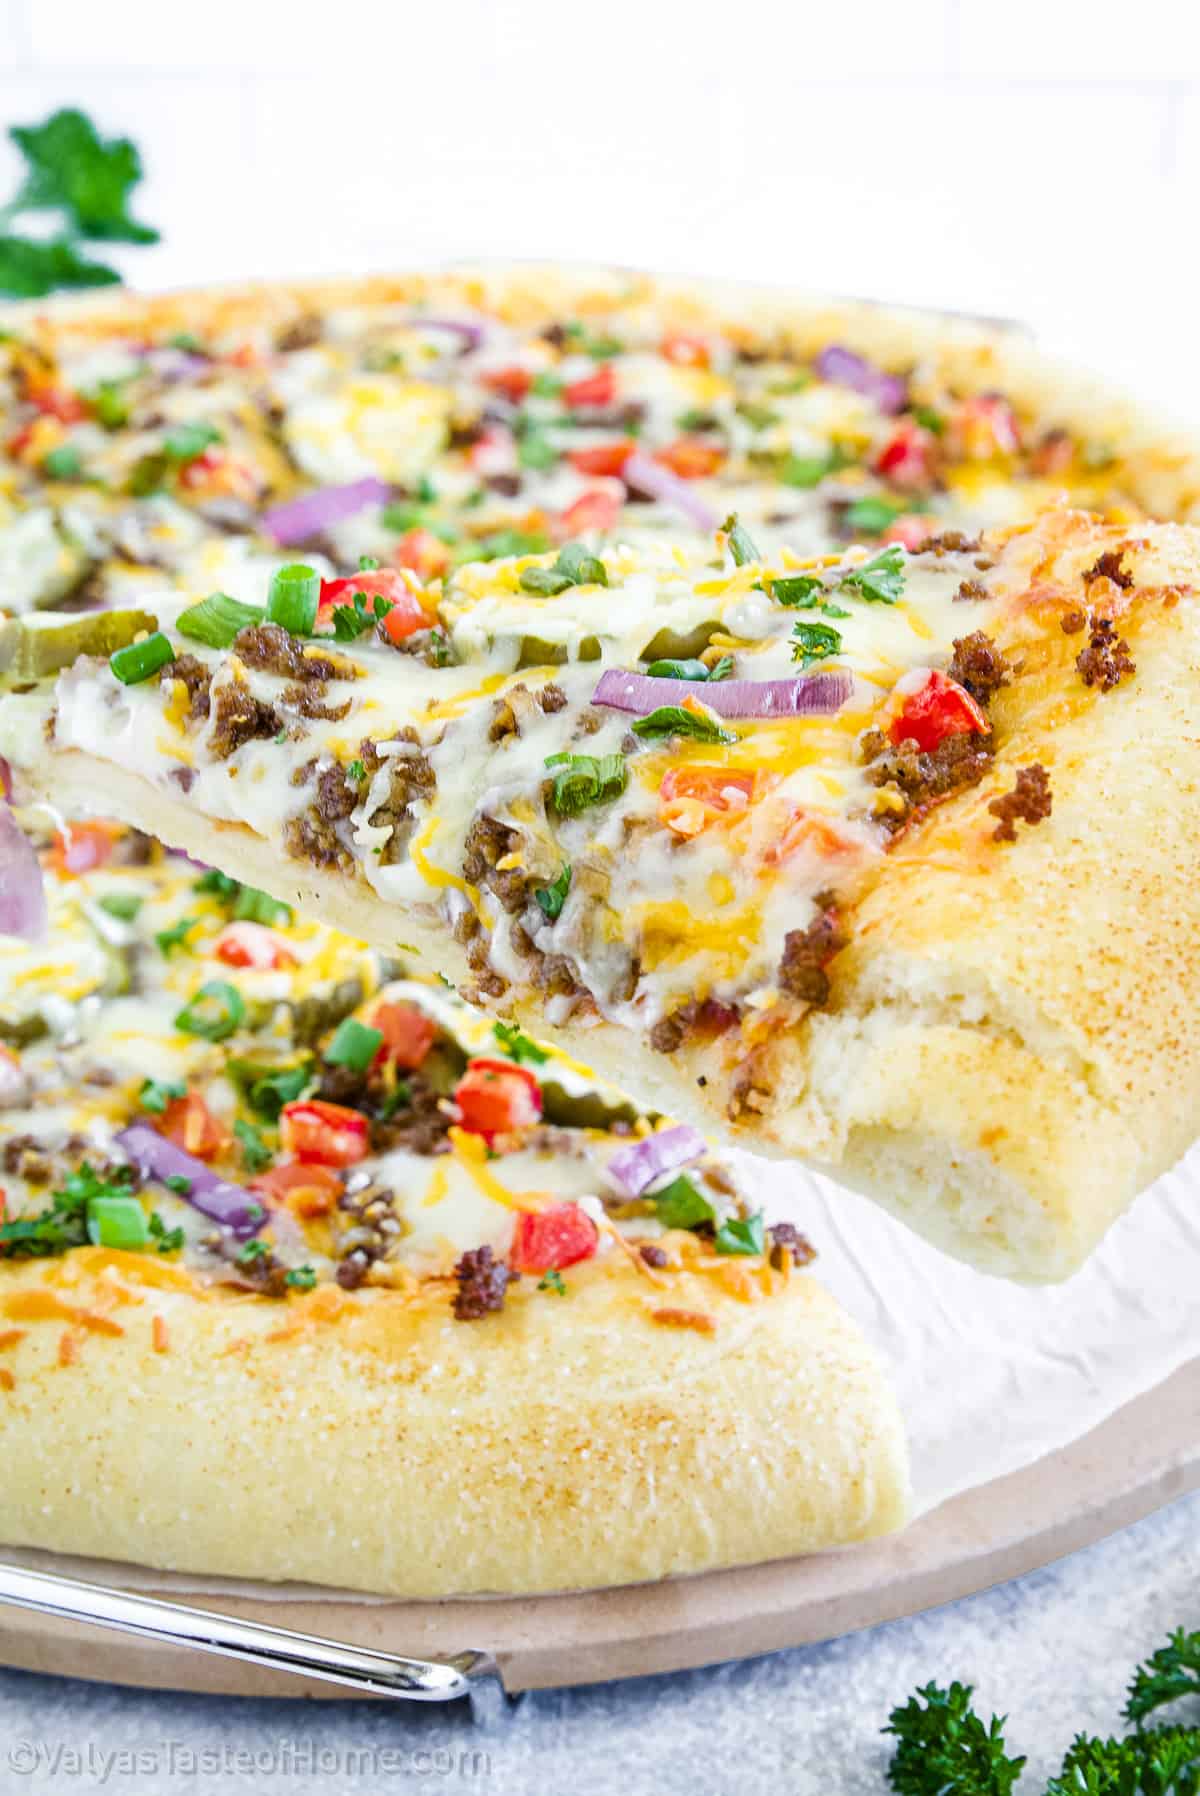 This cheeseburger pizza is truly a fun and tasty twist on the traditional pizza, combining the best elements of a cheeseburger with the convenience and versatility of pizza.